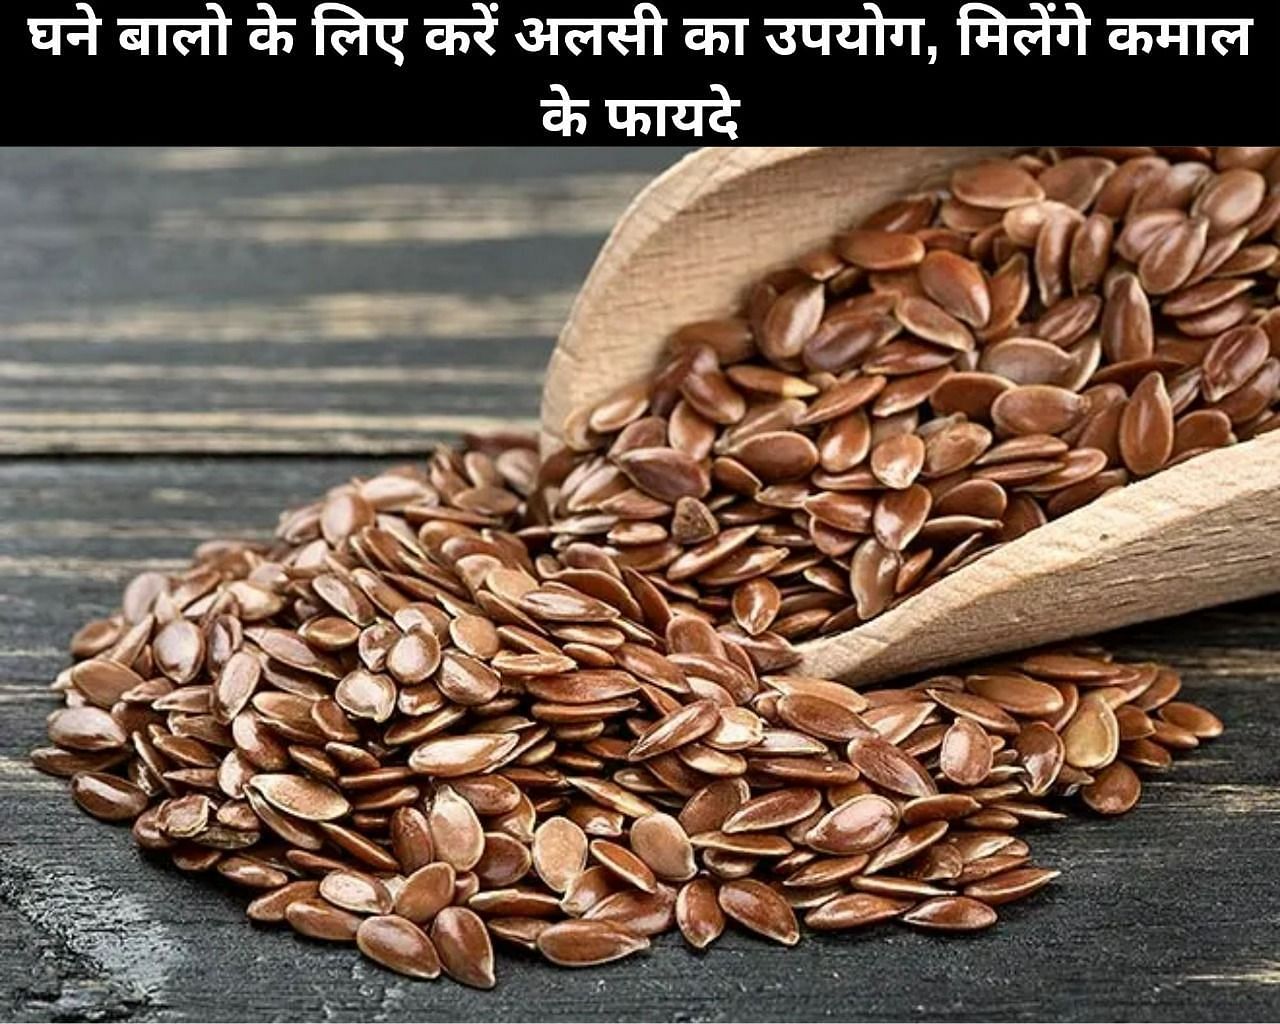 Buy Flaxseed Alsi Oil Online at Best Price in Pakistan - ChiltanPure